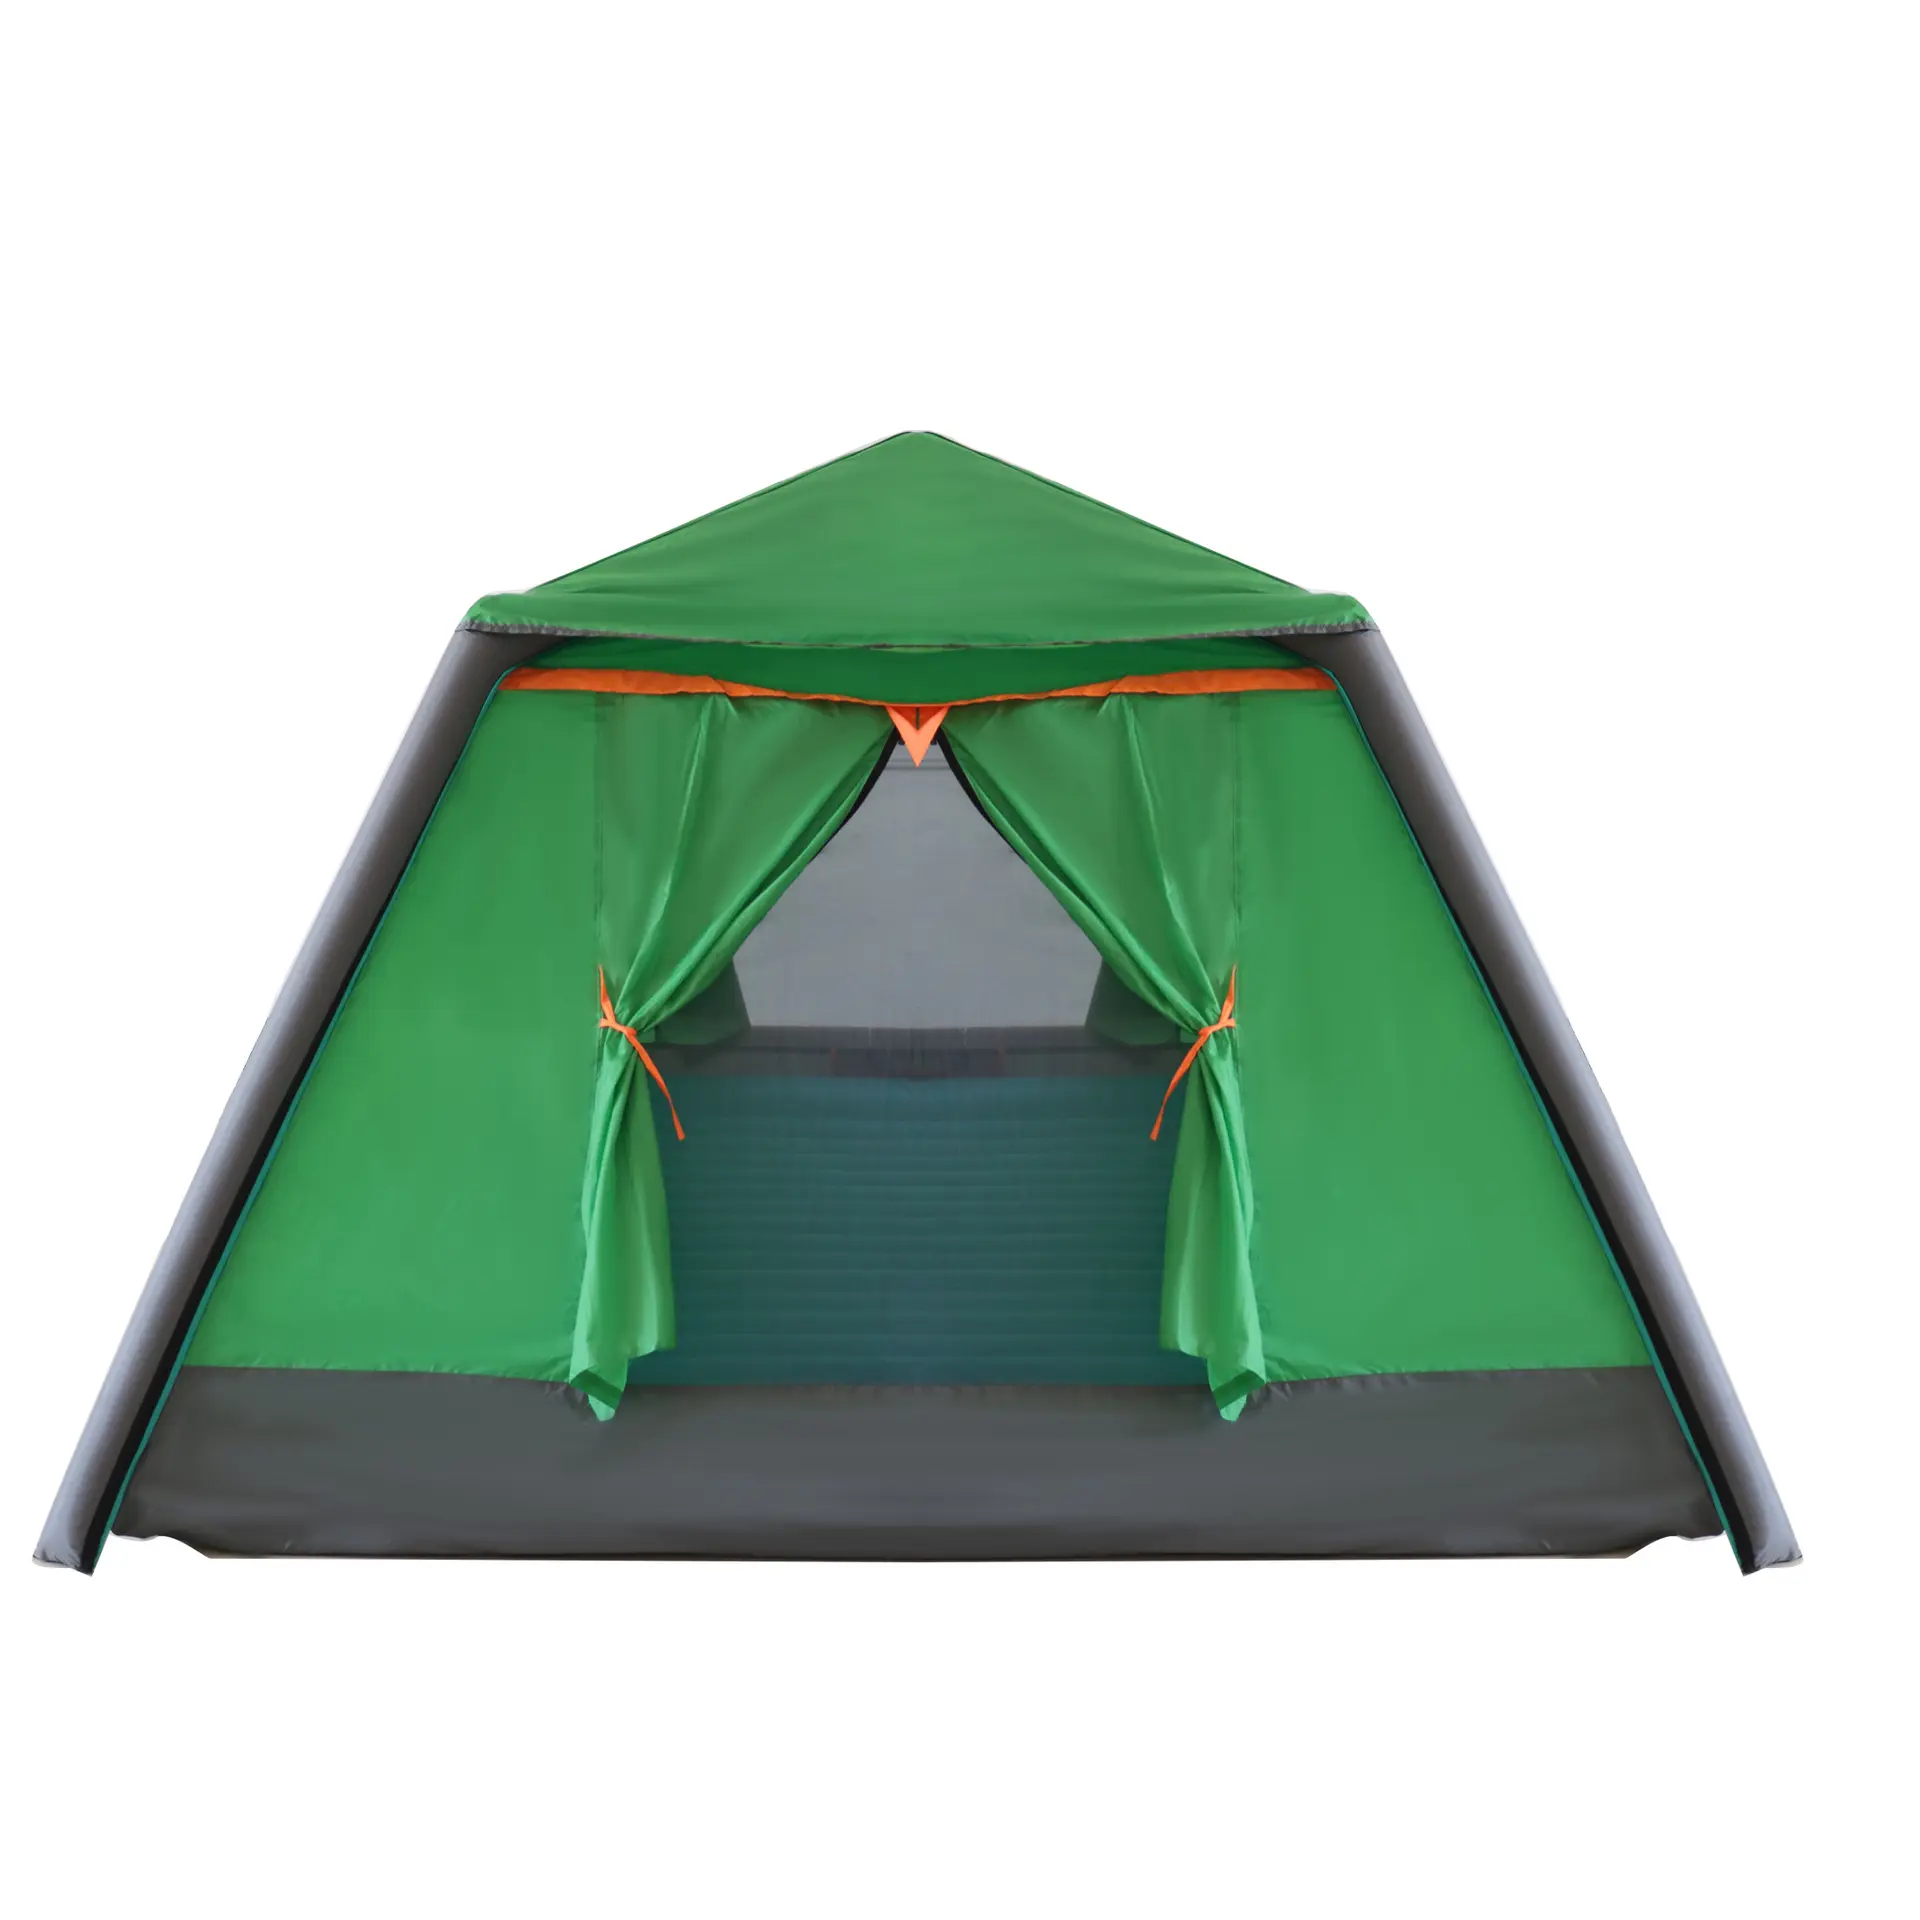 Quick-opening double-layer portable camping inflatable construction-free outdoor mosquito and rain protection outdoor tents